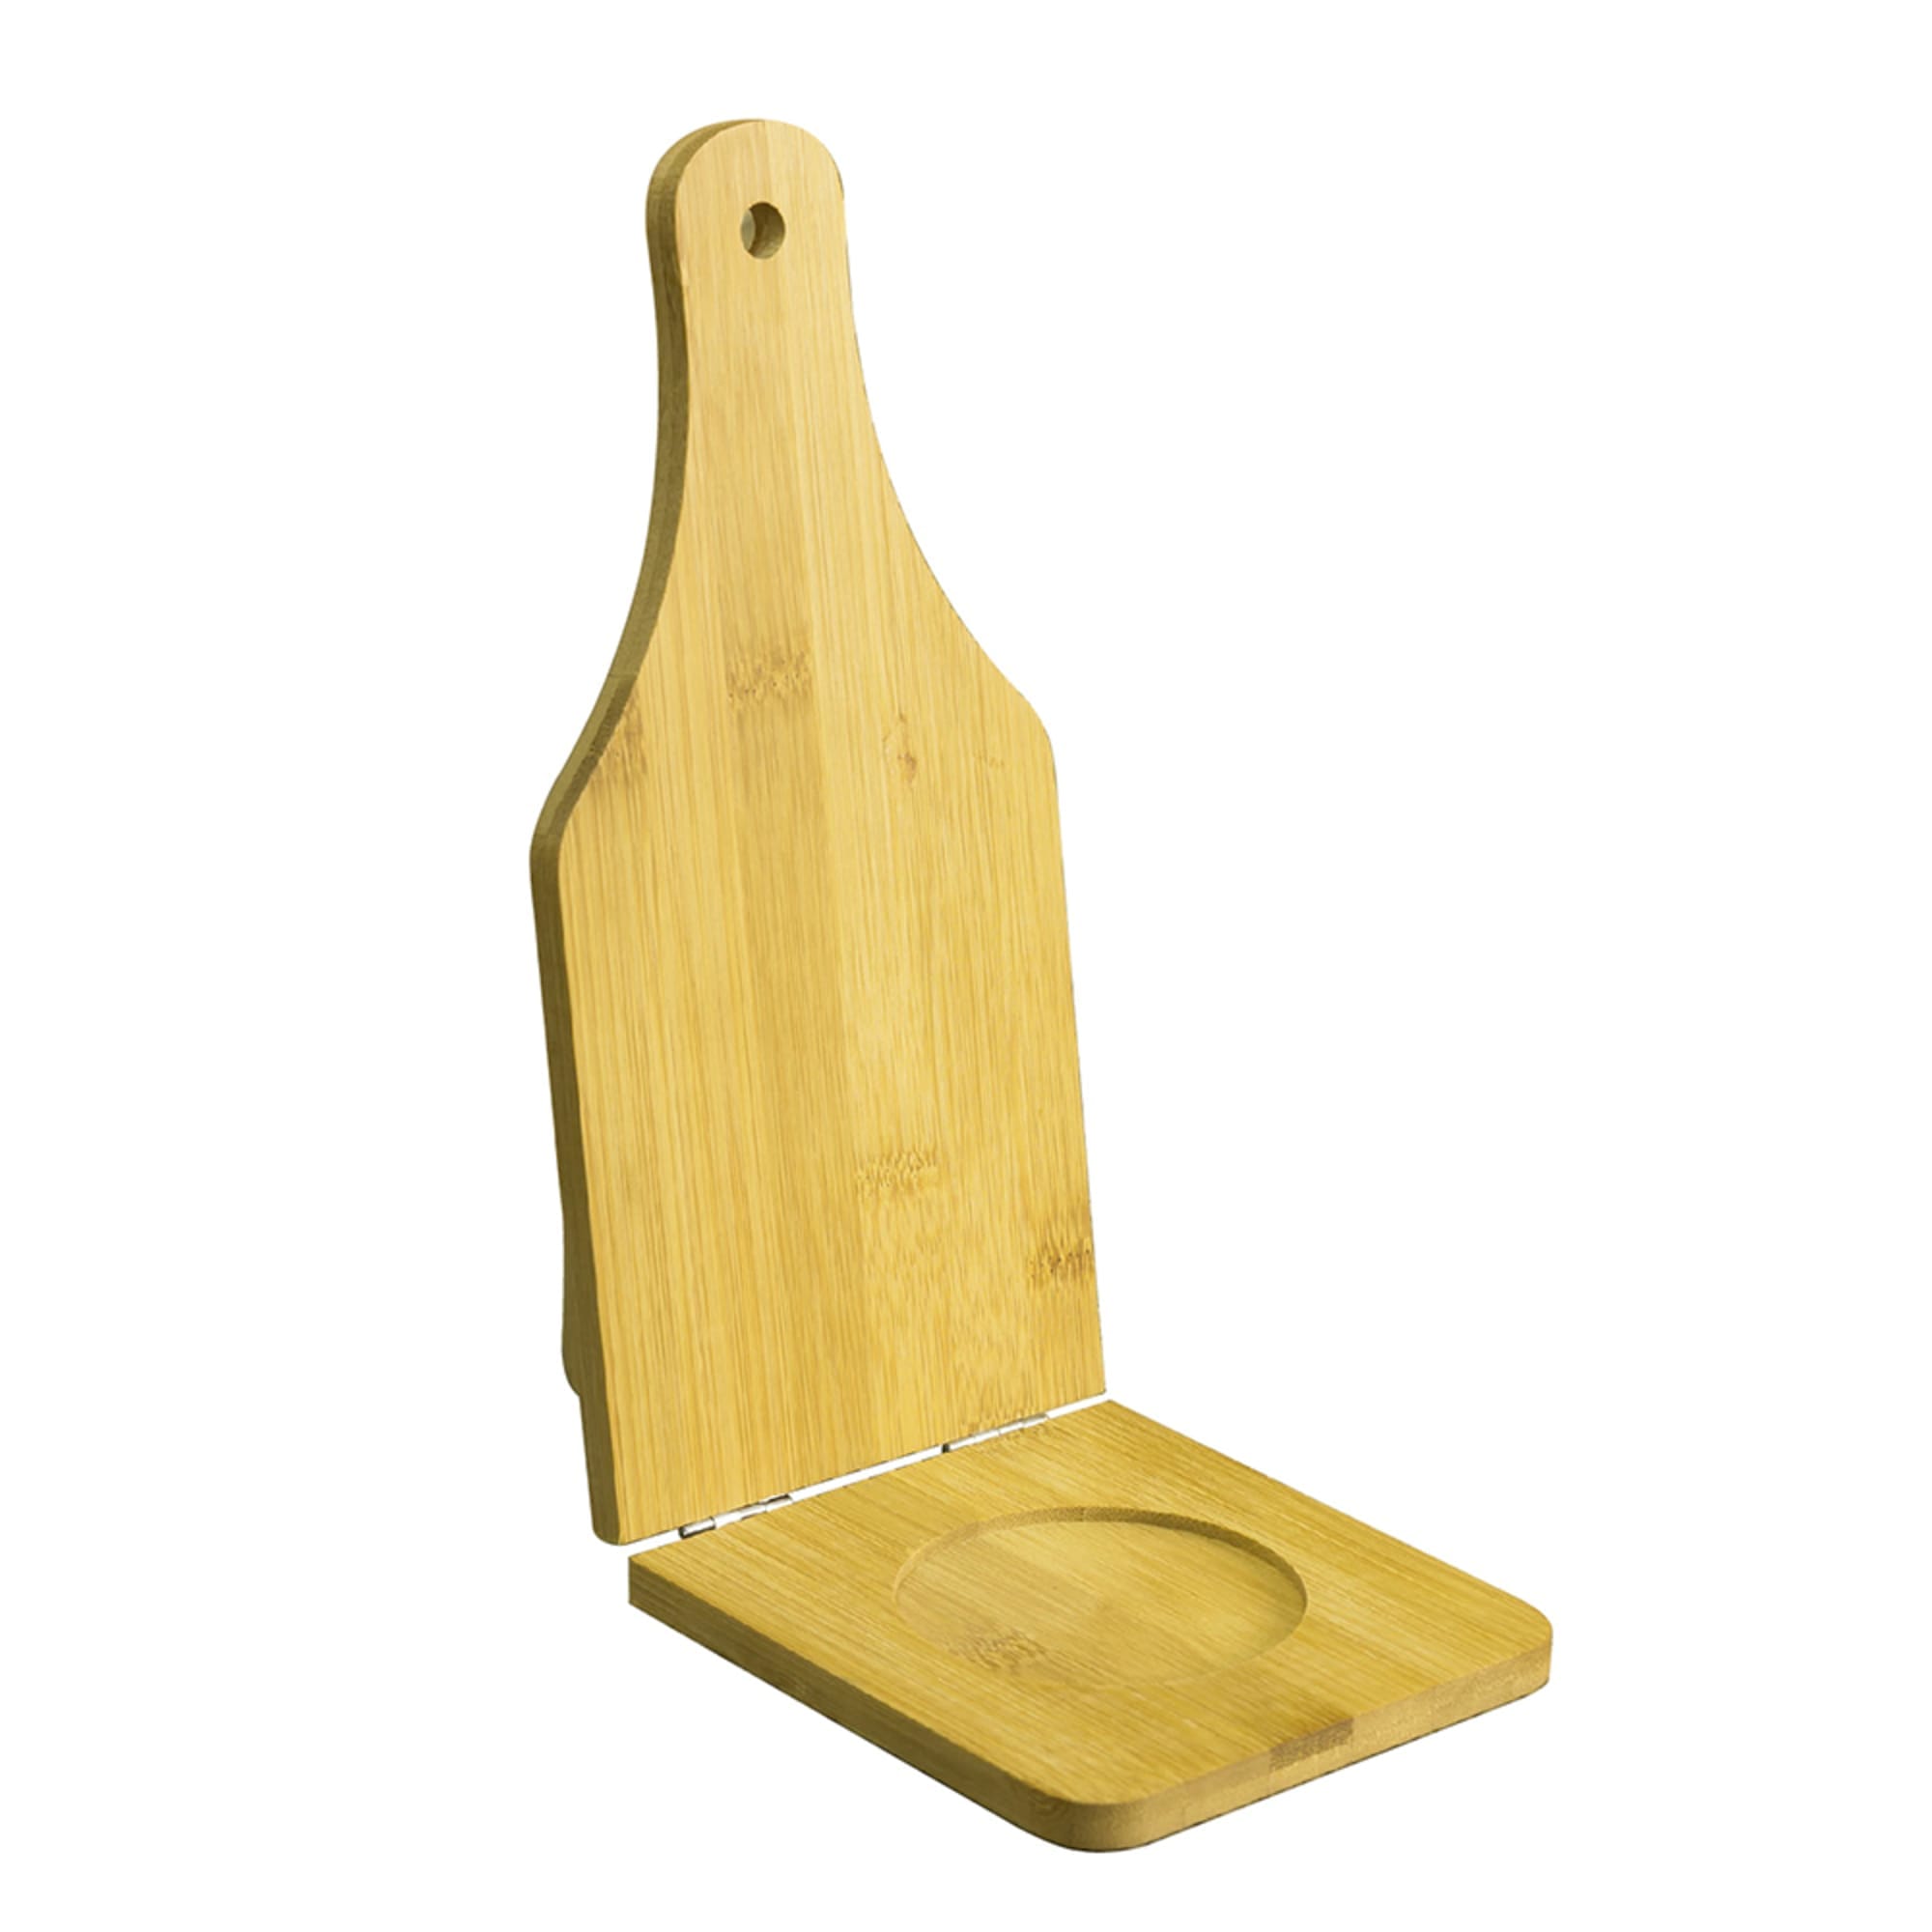 Home Basics Easy Press Large Bamboo Tostonera, Natural $3.00 EACH, CASE PACK OF 24